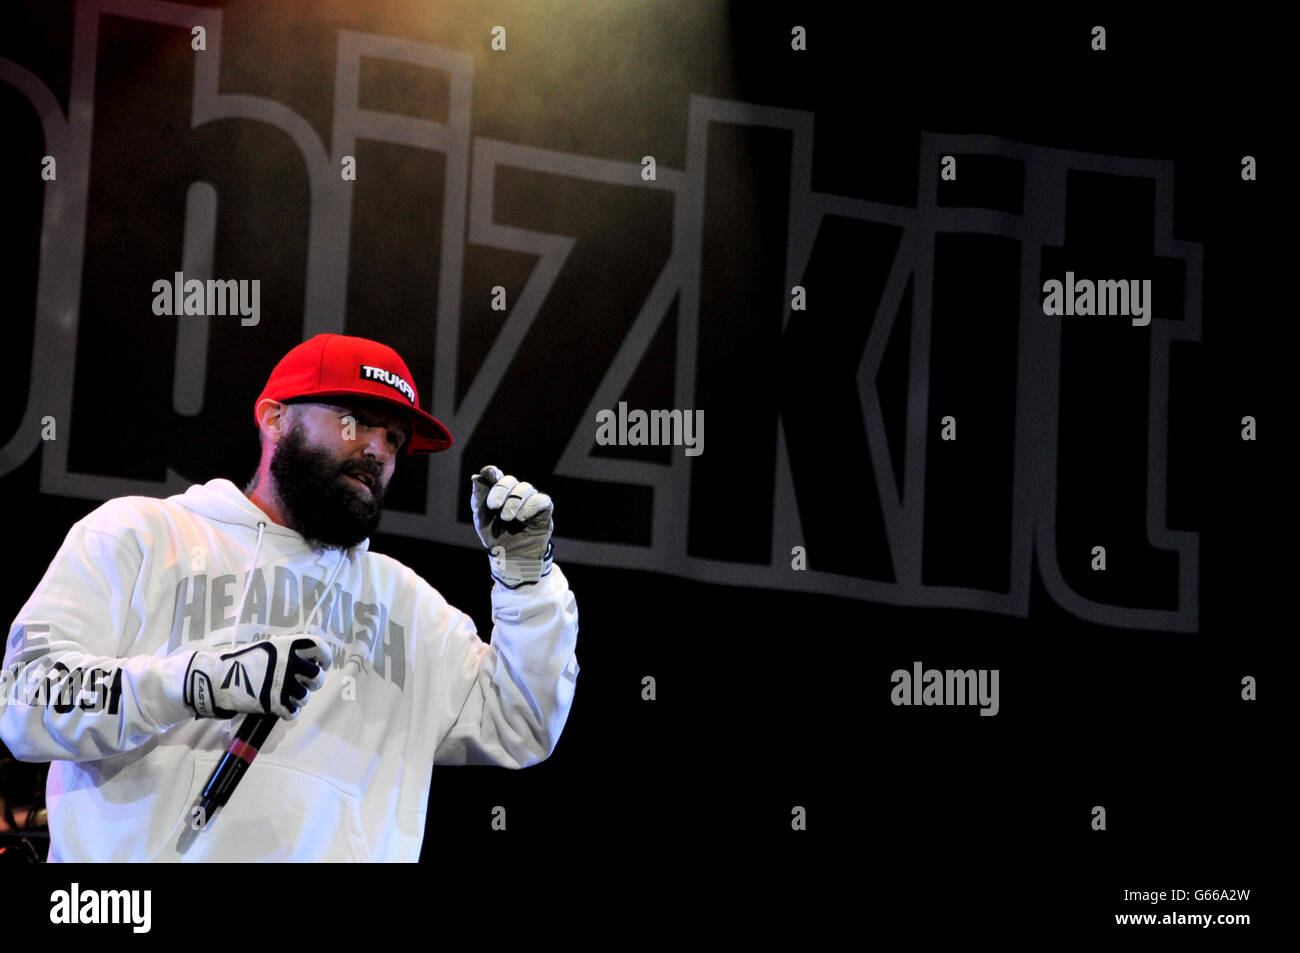 Fred Durst of Limp Bizkit performs during the Download Festival at Castle Donington. Stock Photo